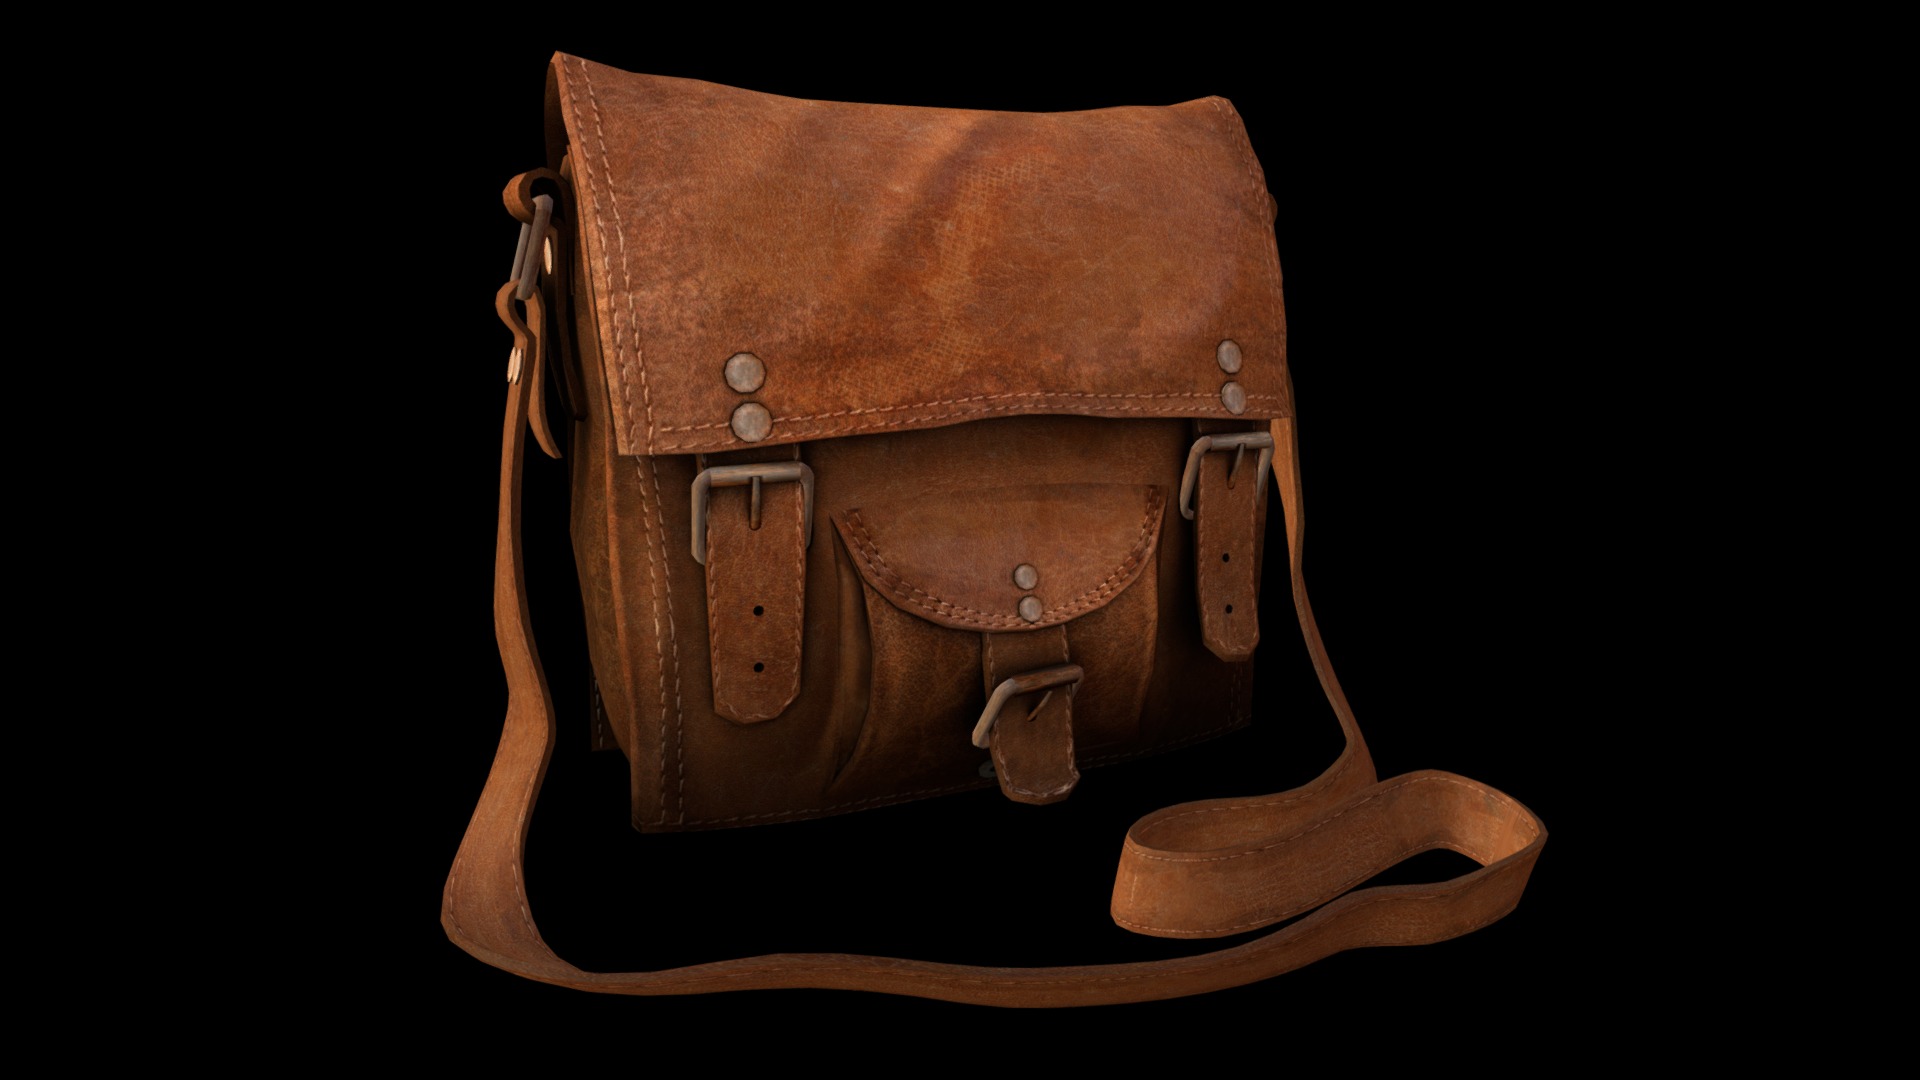 3D model Old Leather Bag - This is a 3D model of the Old Leather Bag. The 3D model is about a brown leather purse.